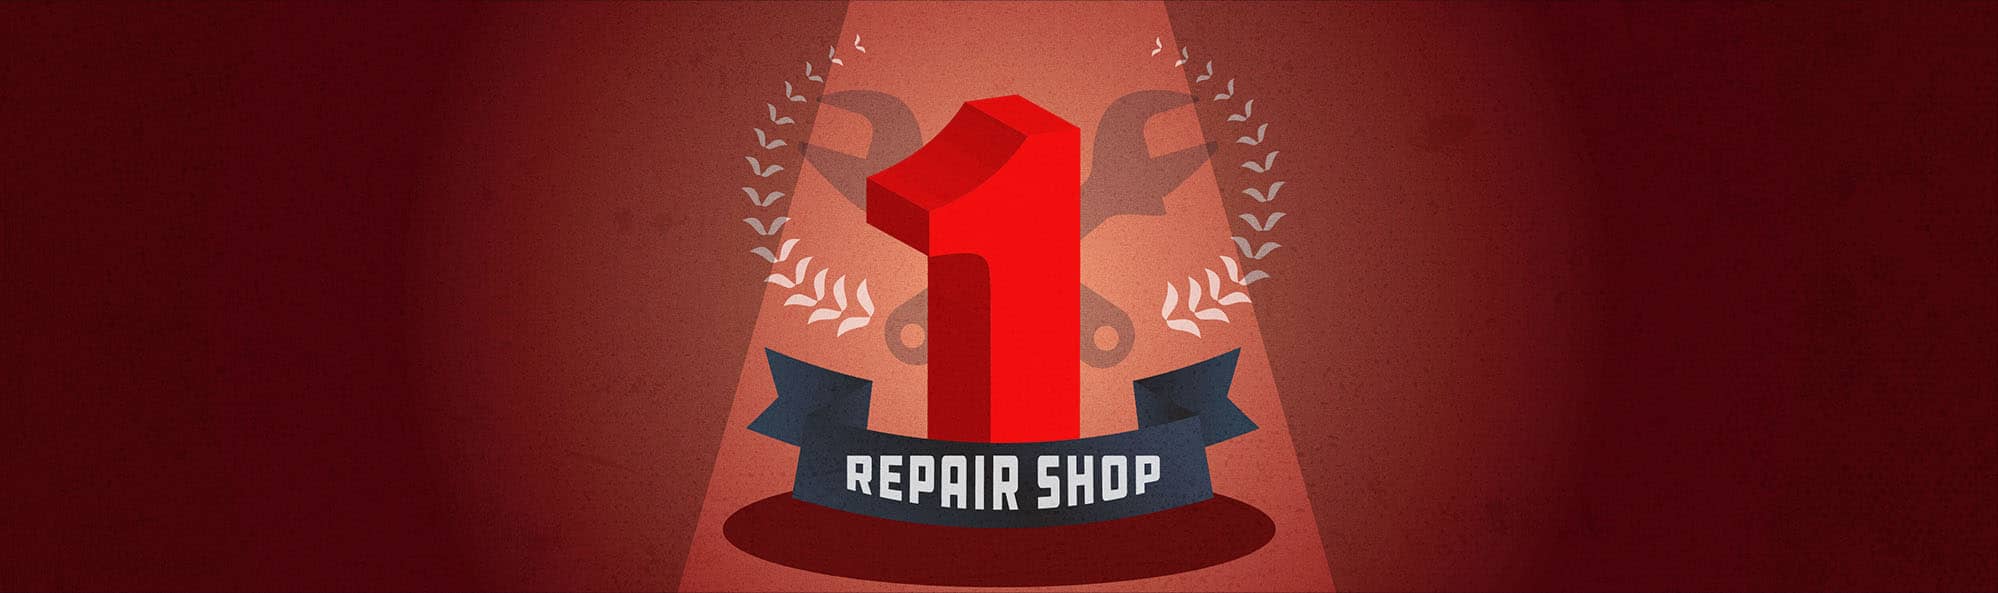 How Fullbay Can Help You Become Repair Shop of Choice for Fleets